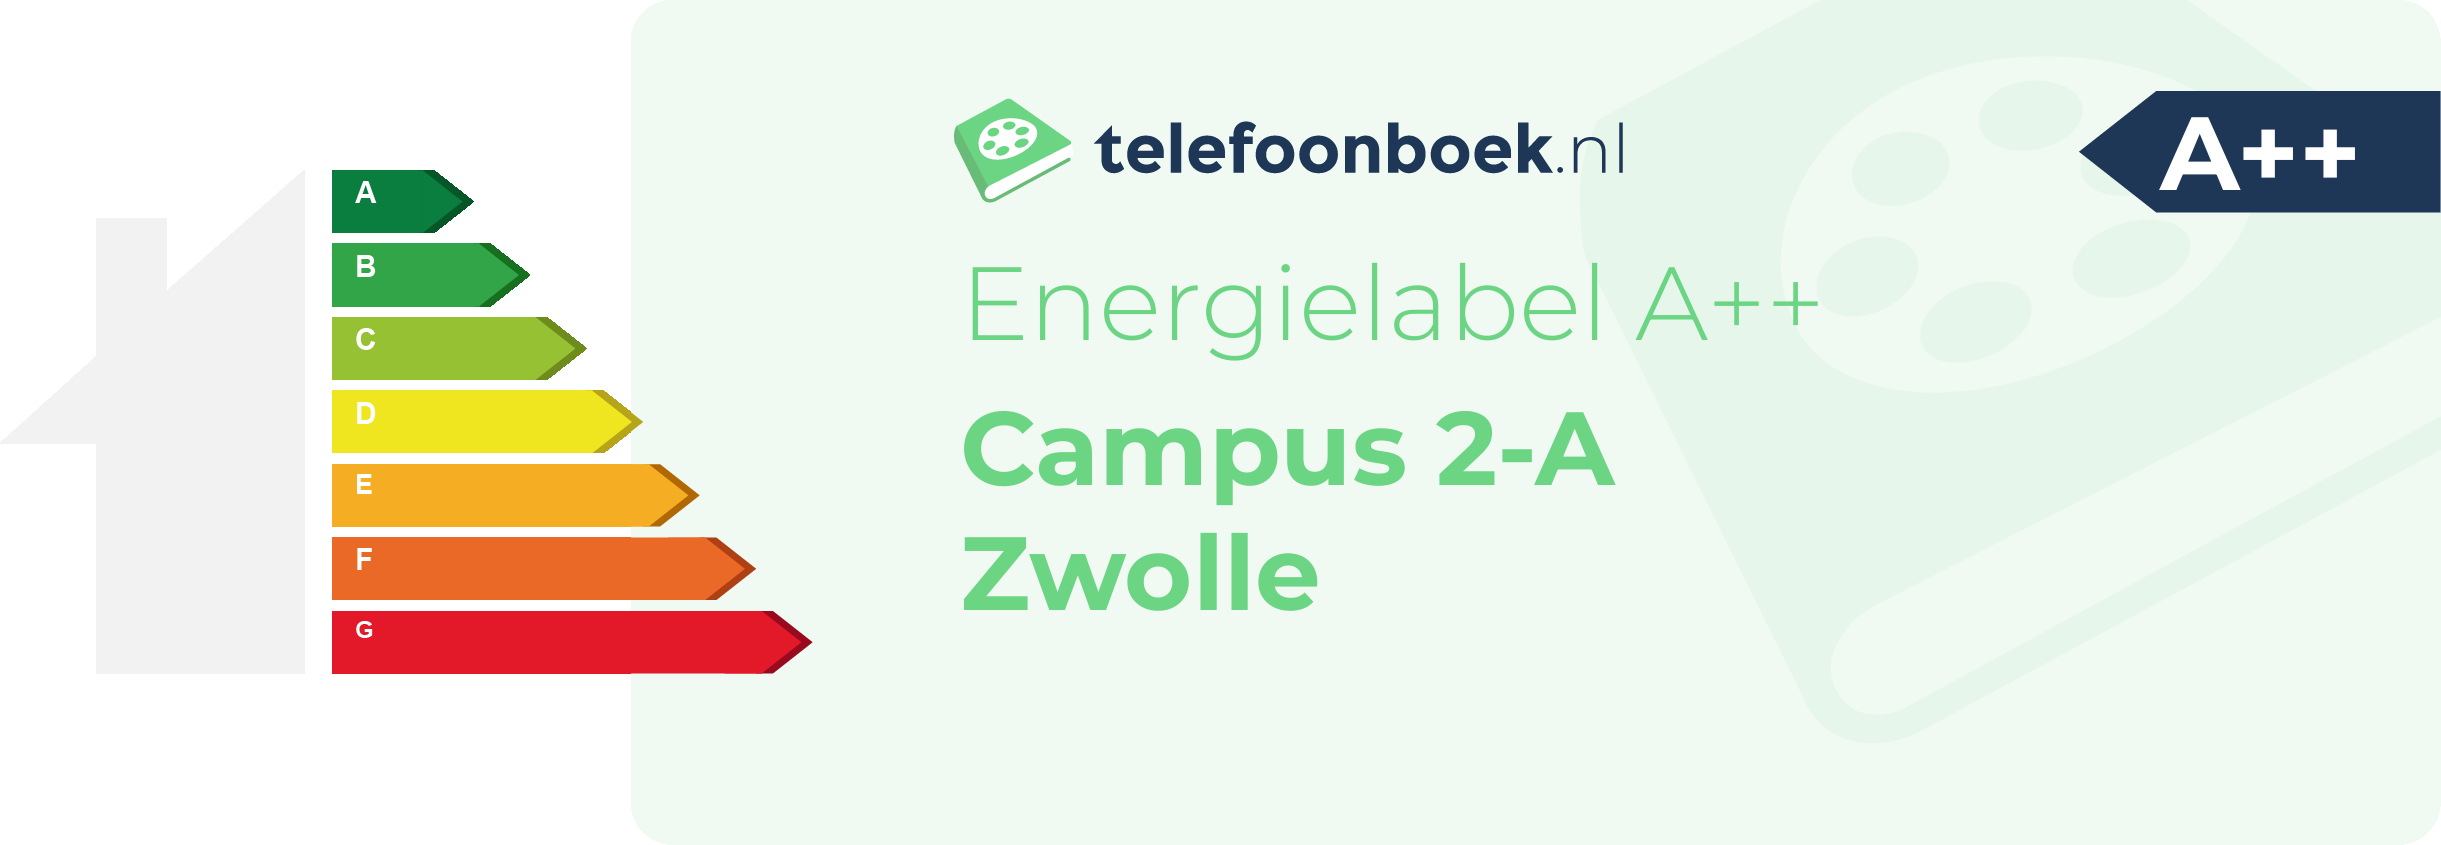 Energielabel Campus 2-A Zwolle